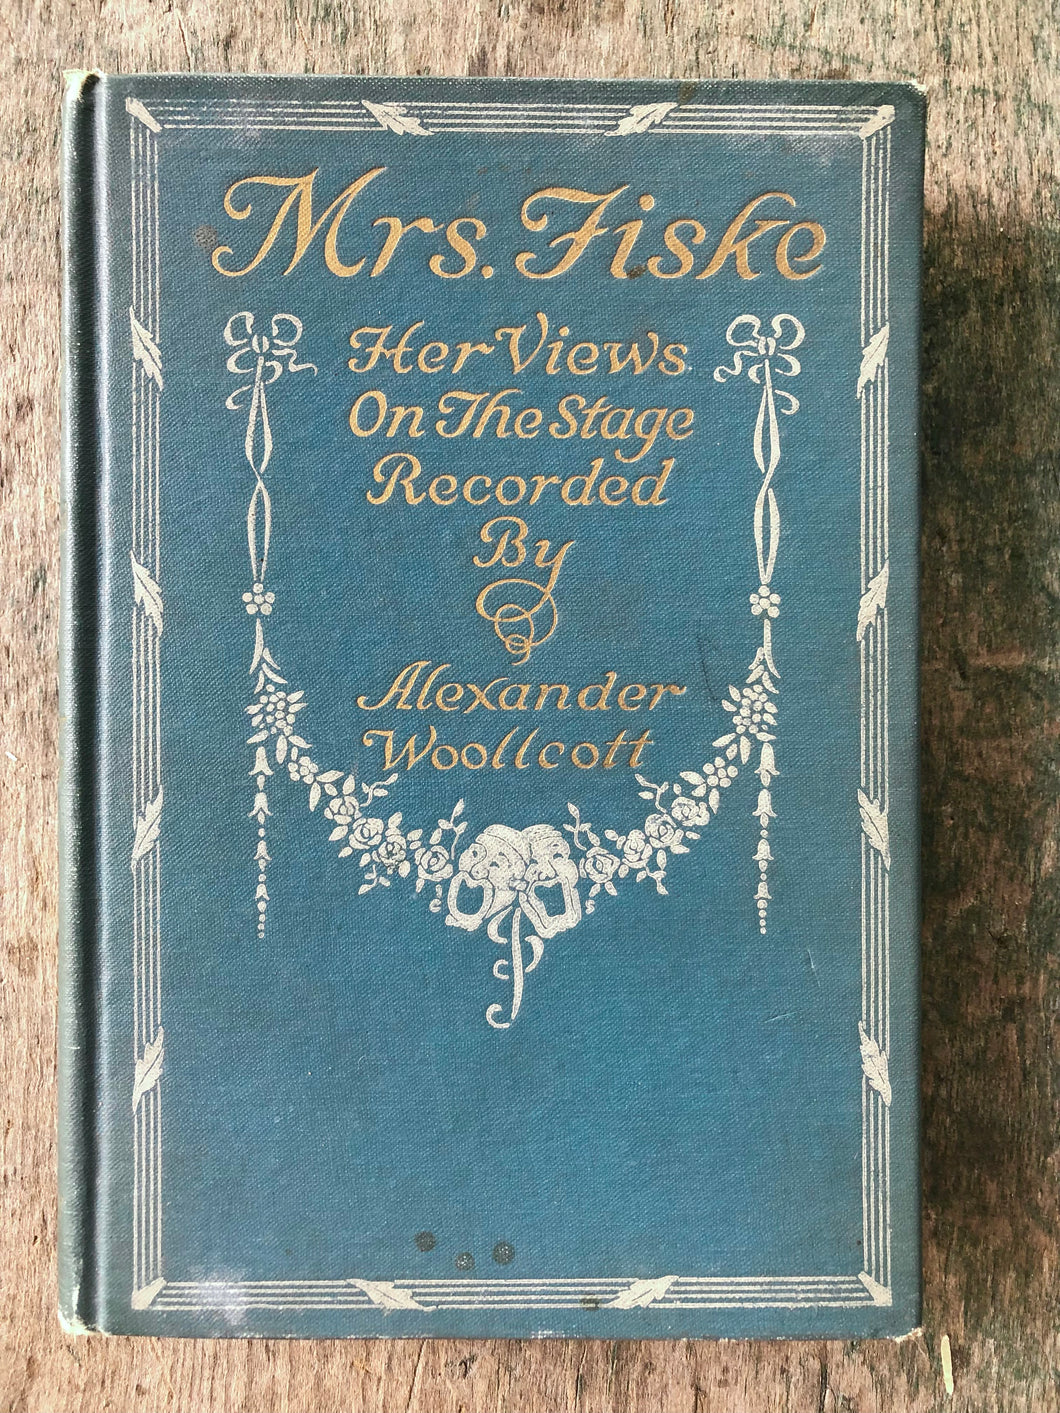 Mrs. Fiske: Her Views on Acting, and the Problems of Production recorded by Alexander Woolcott